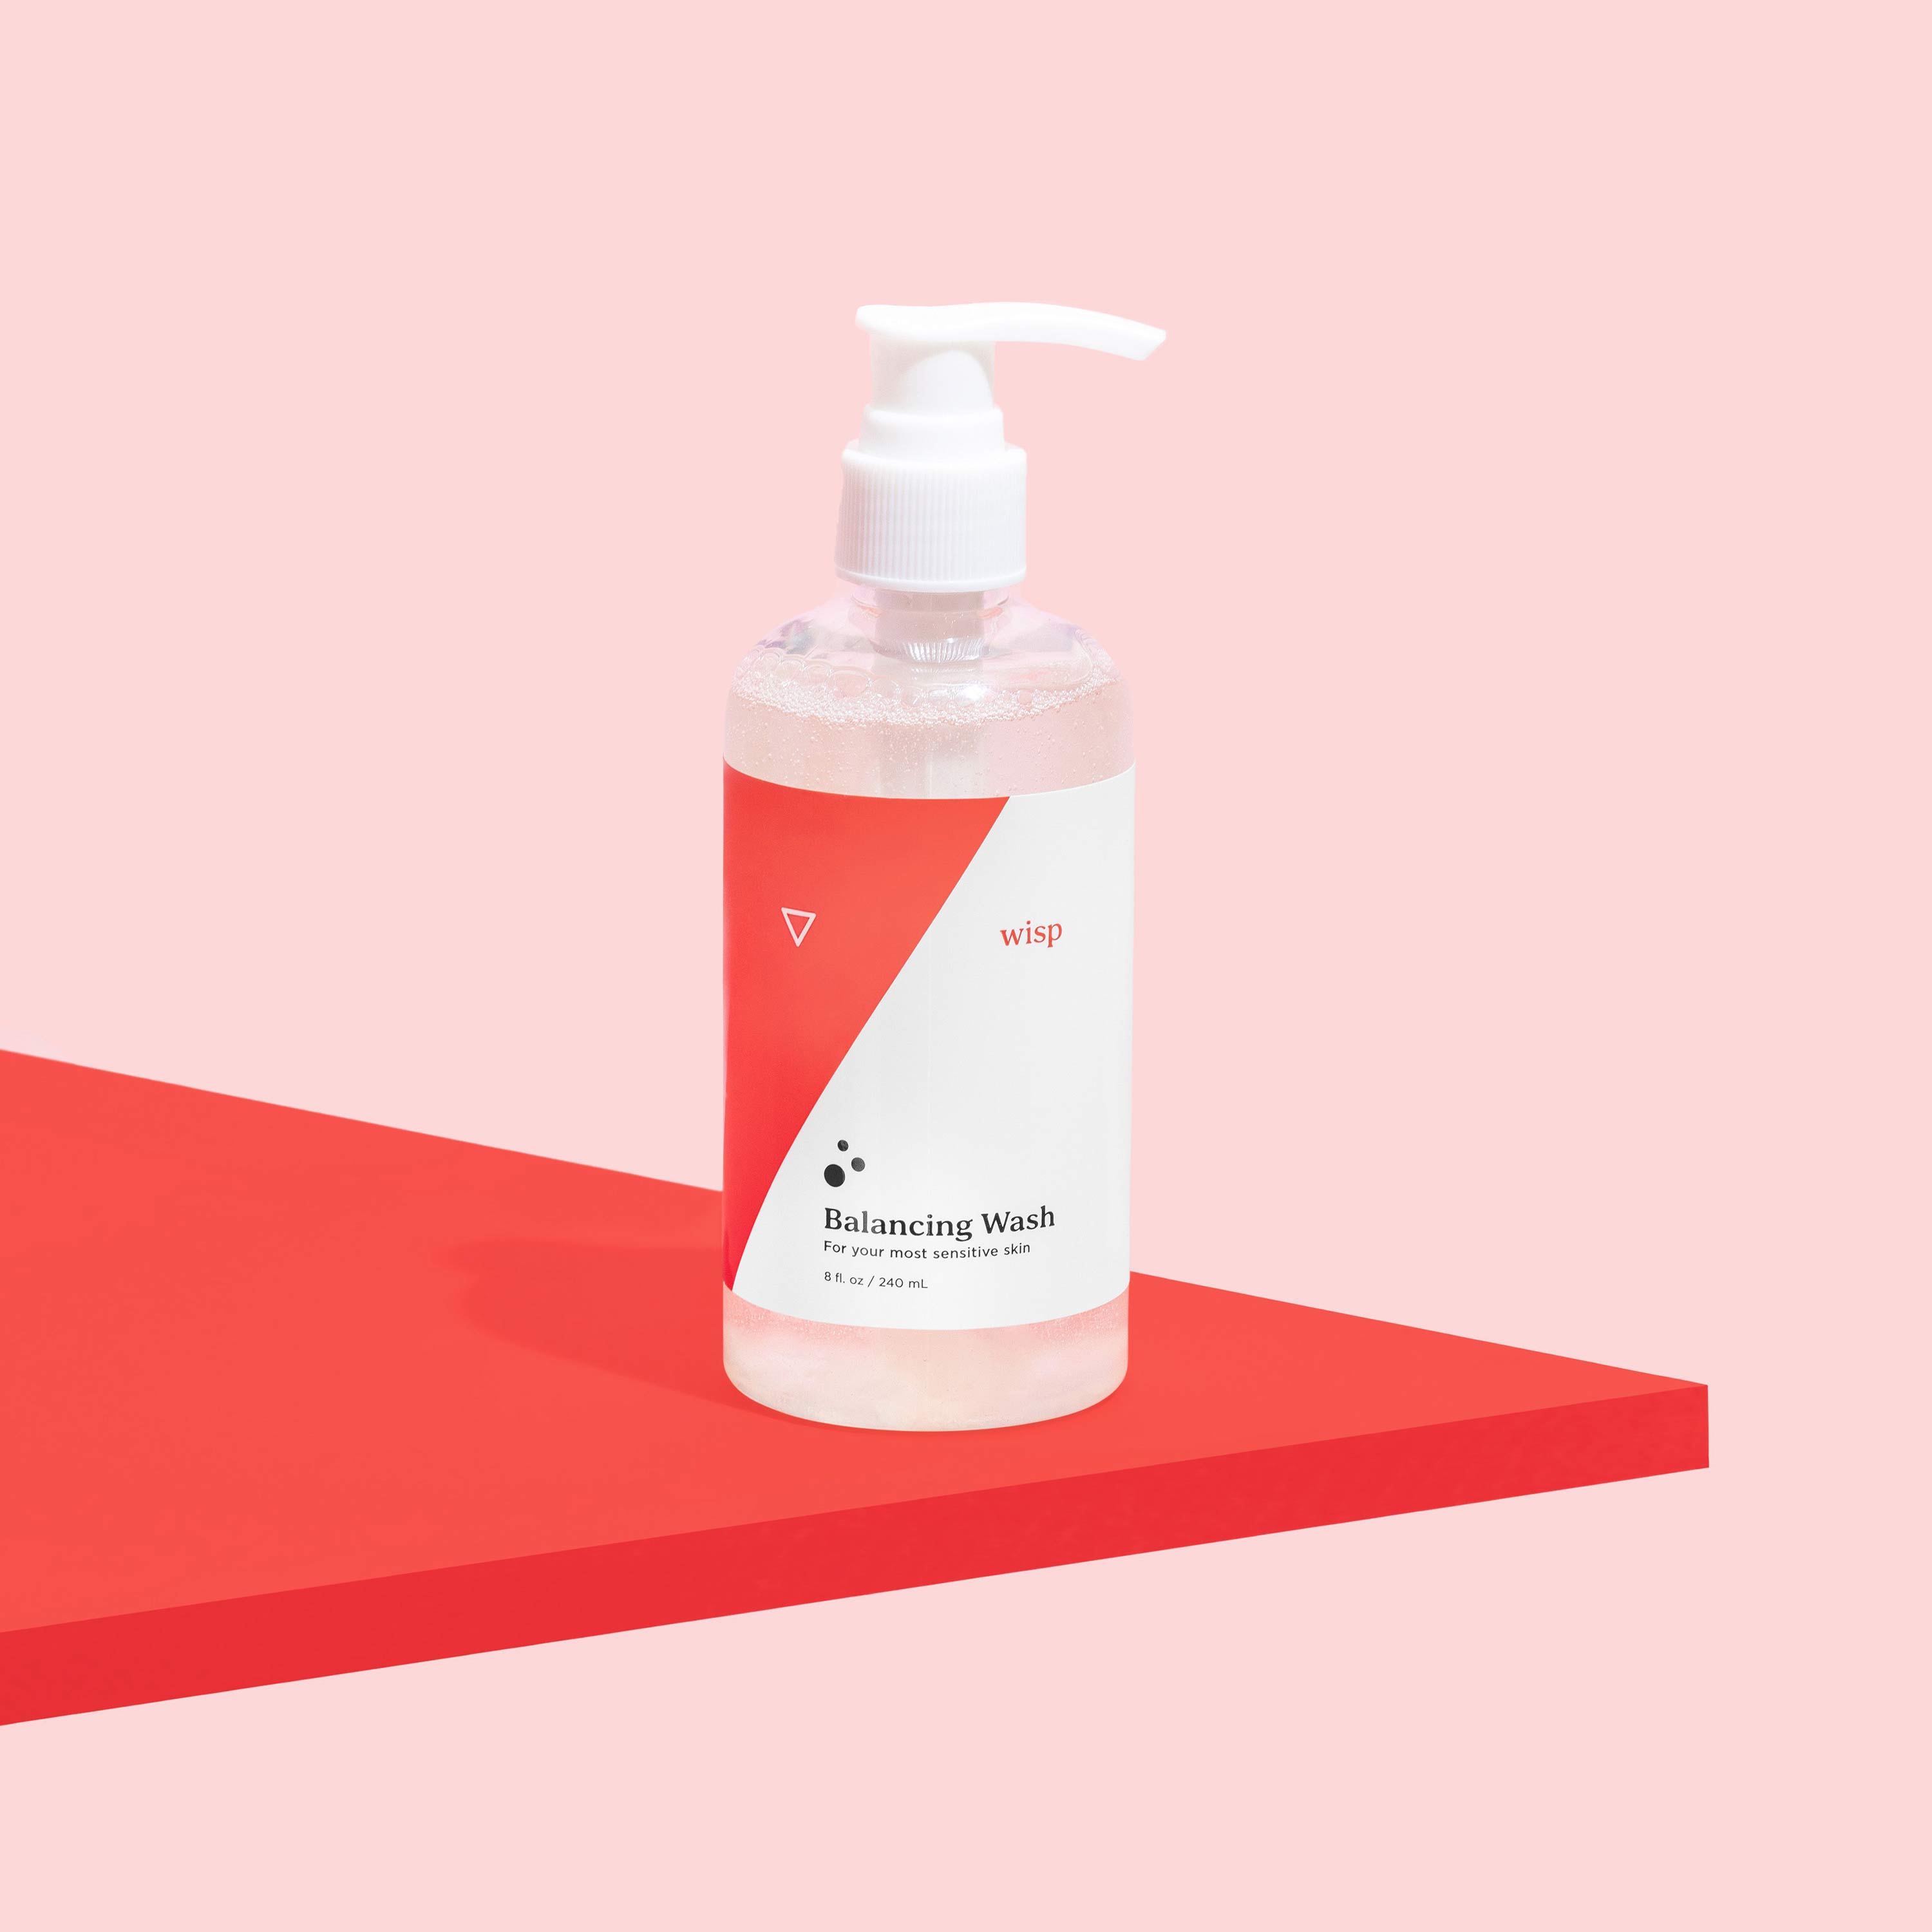 Bottle of Wisp Balancing Wash for intimate care on a pink background and red surface